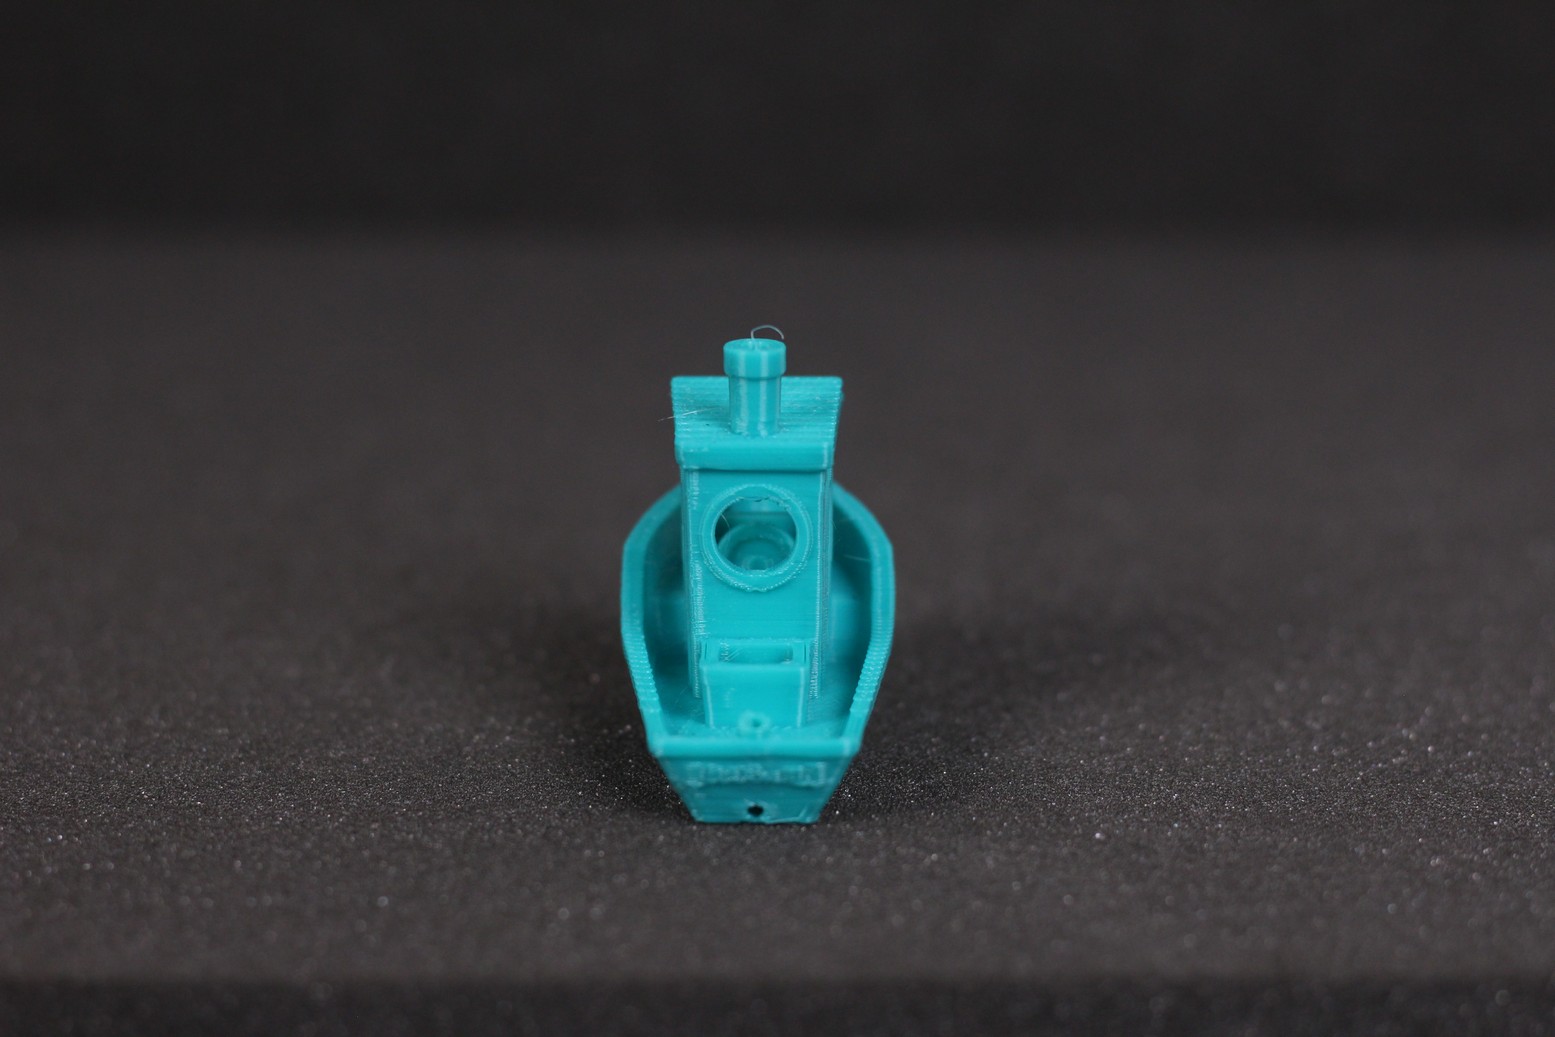 Ender 2 Pro 3D Benchy 6 | Creality Ender 2 Pro Review: Is it worth it?